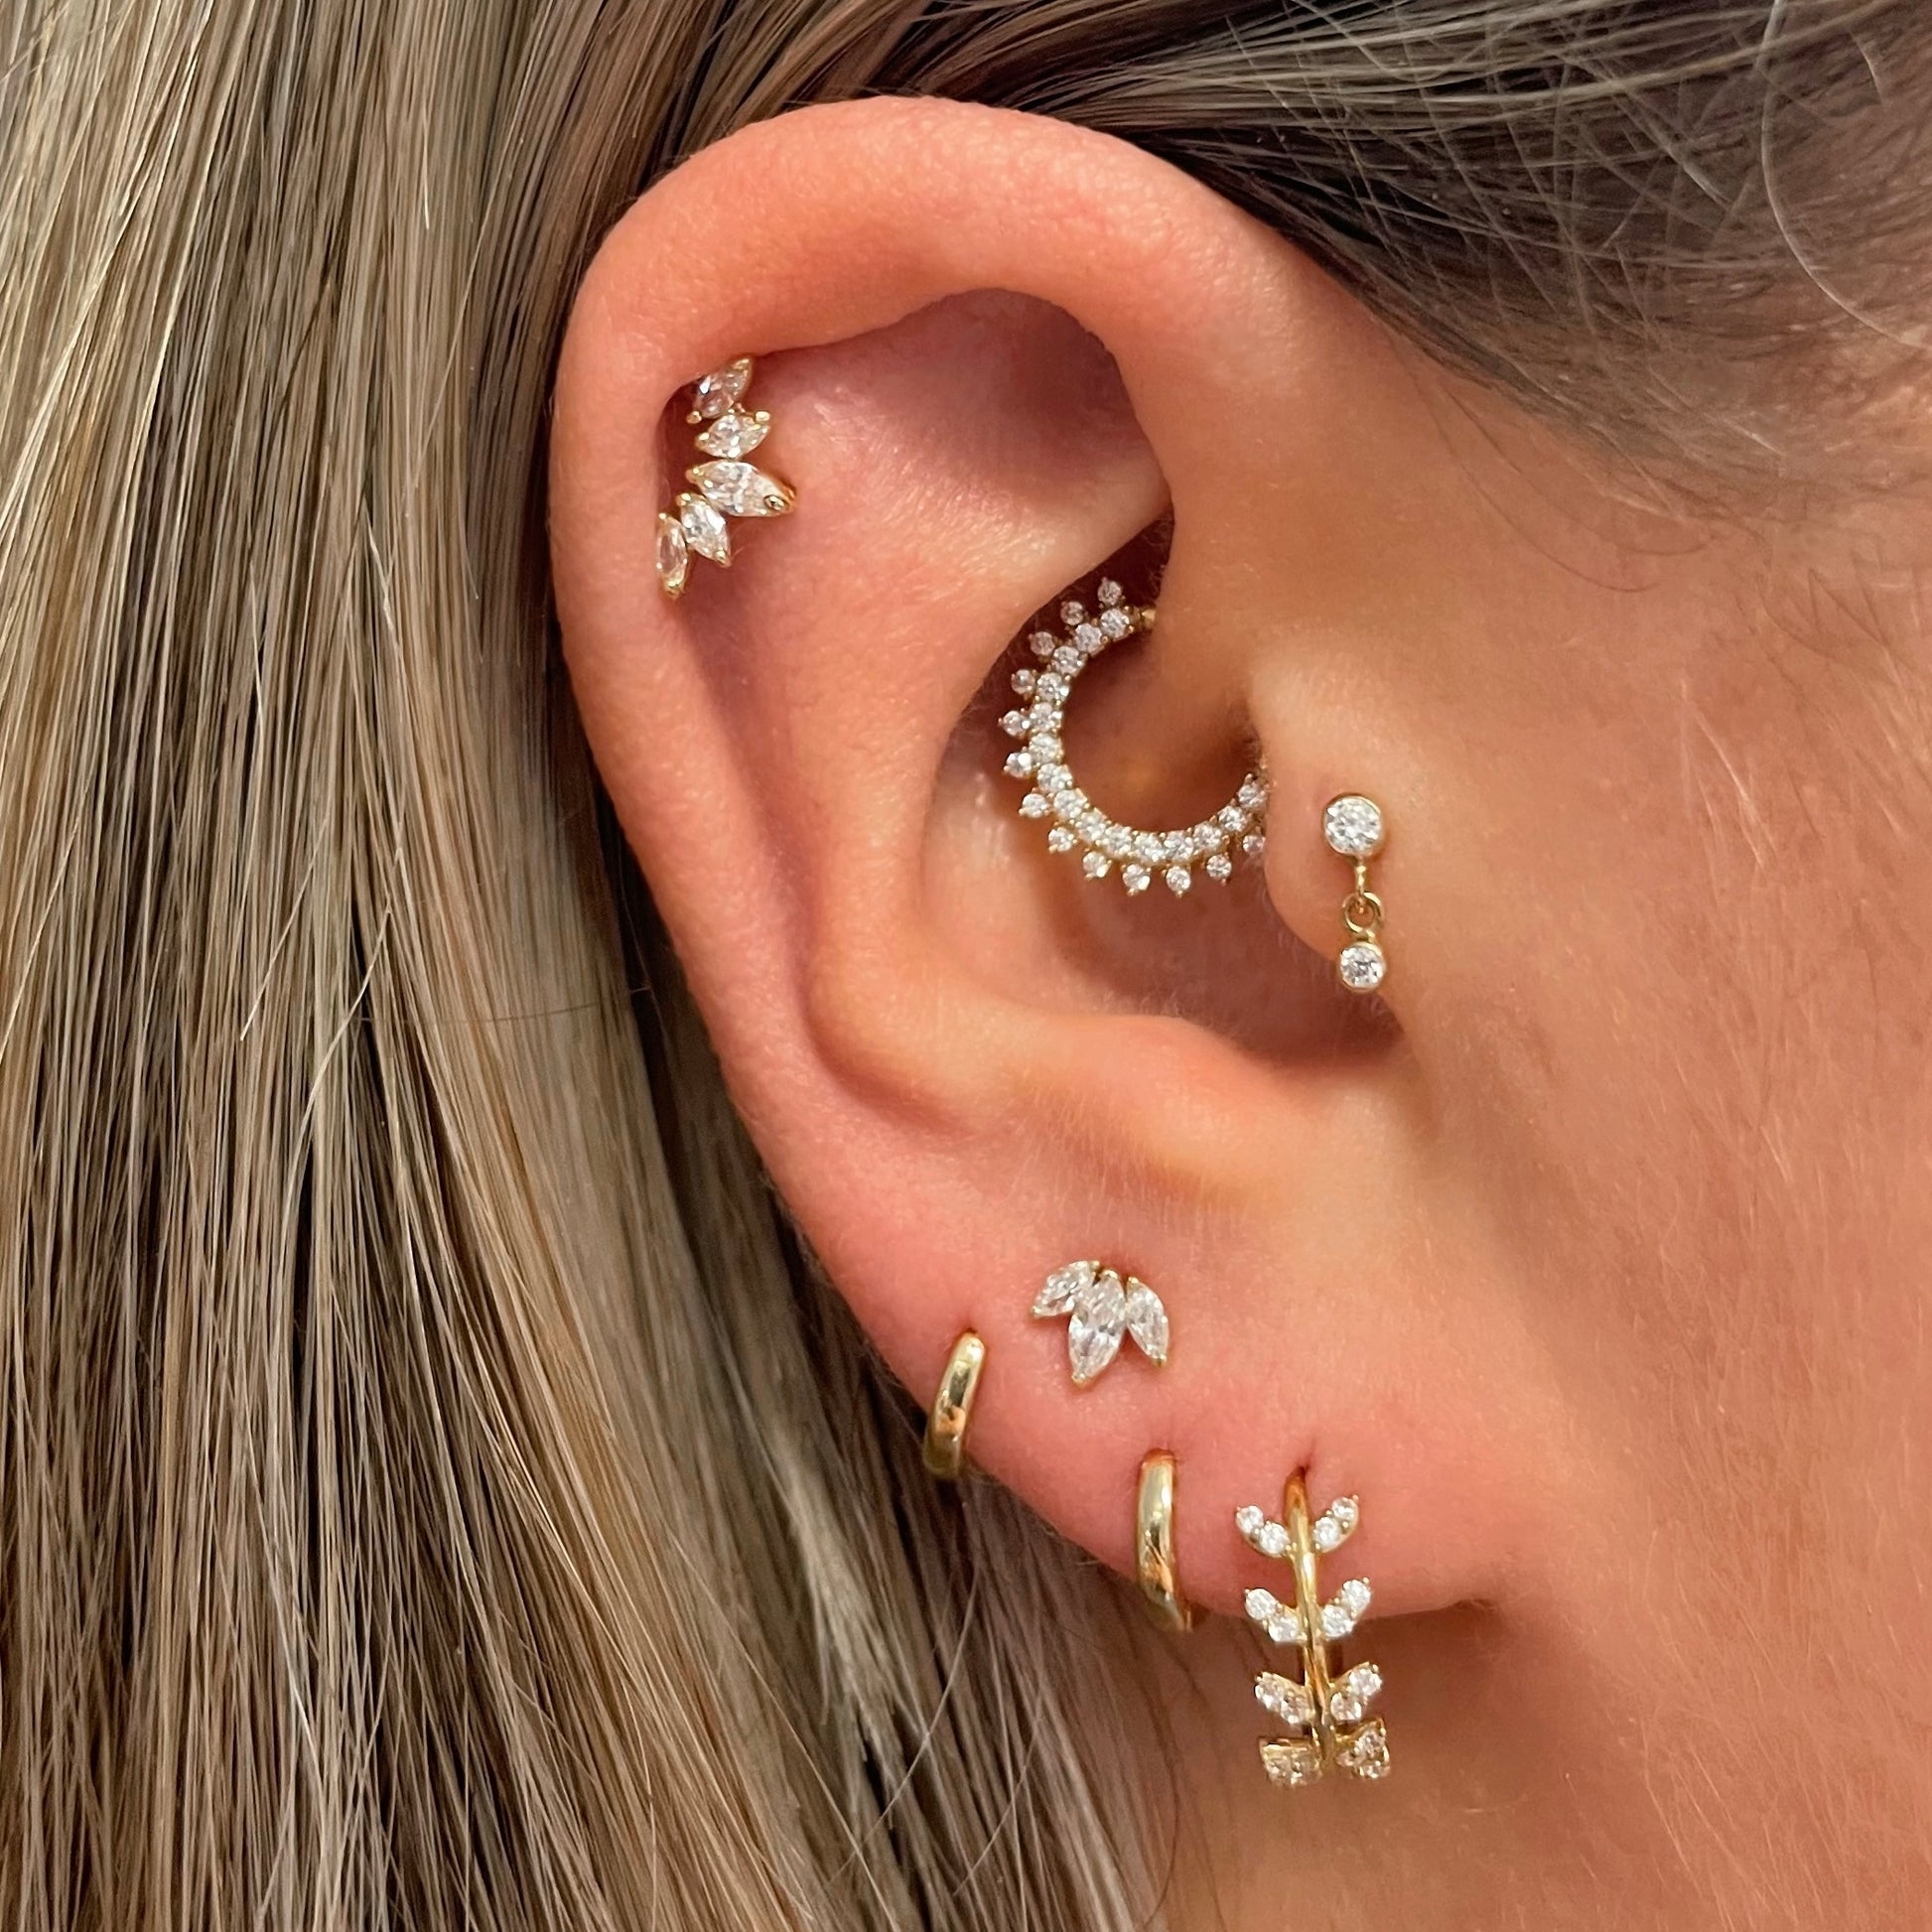 Everything you need to know about tragus piercings – Laura Bond